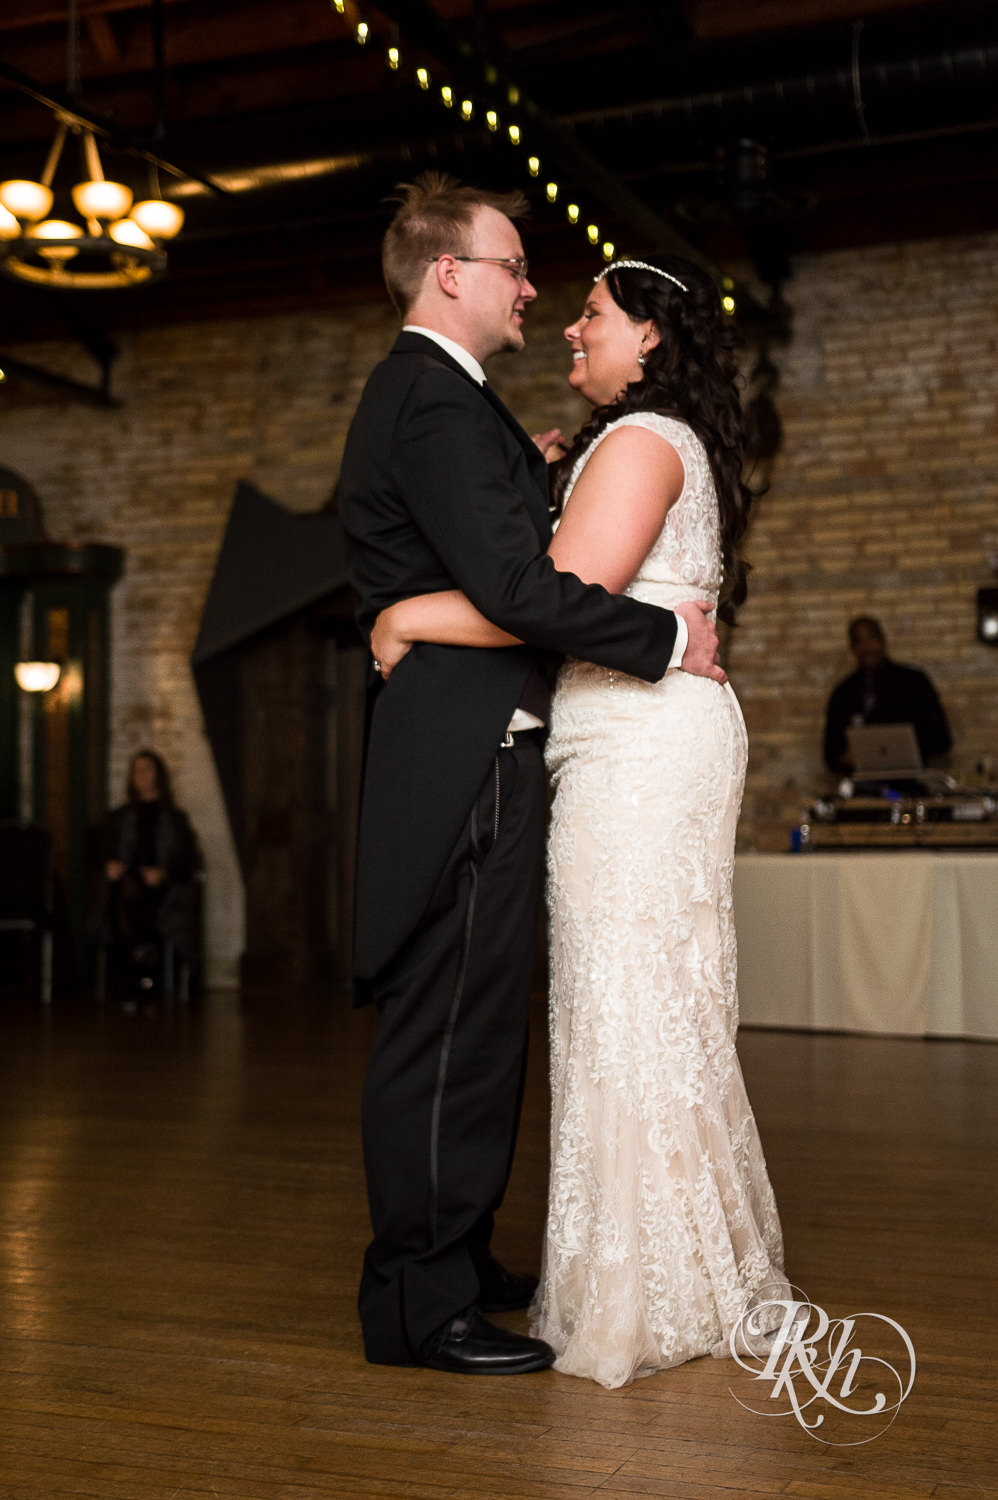 Bride and groom dance during indoor wedding reception at Kellerman's Event Center in White Bear Lake, Minnesota.